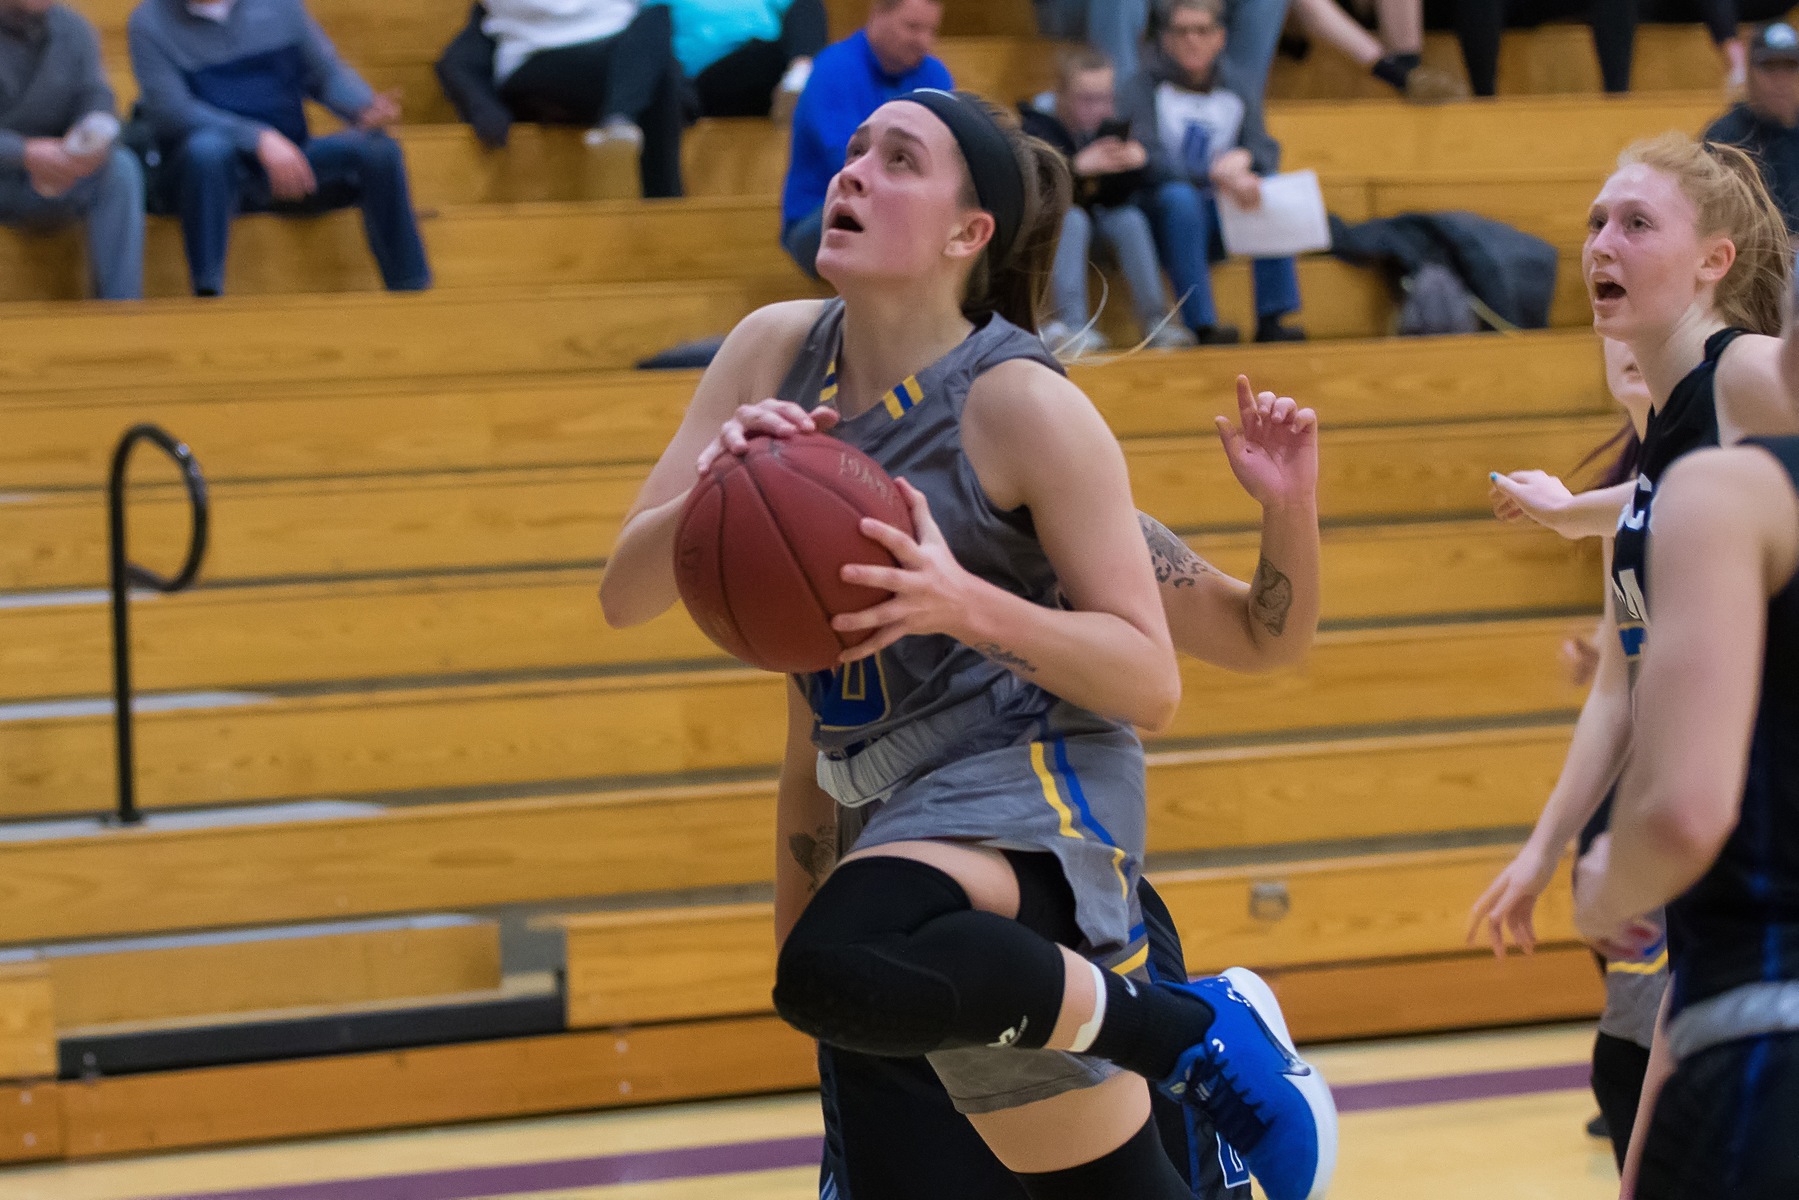 Lakers Fall to Top Ranked NIACC